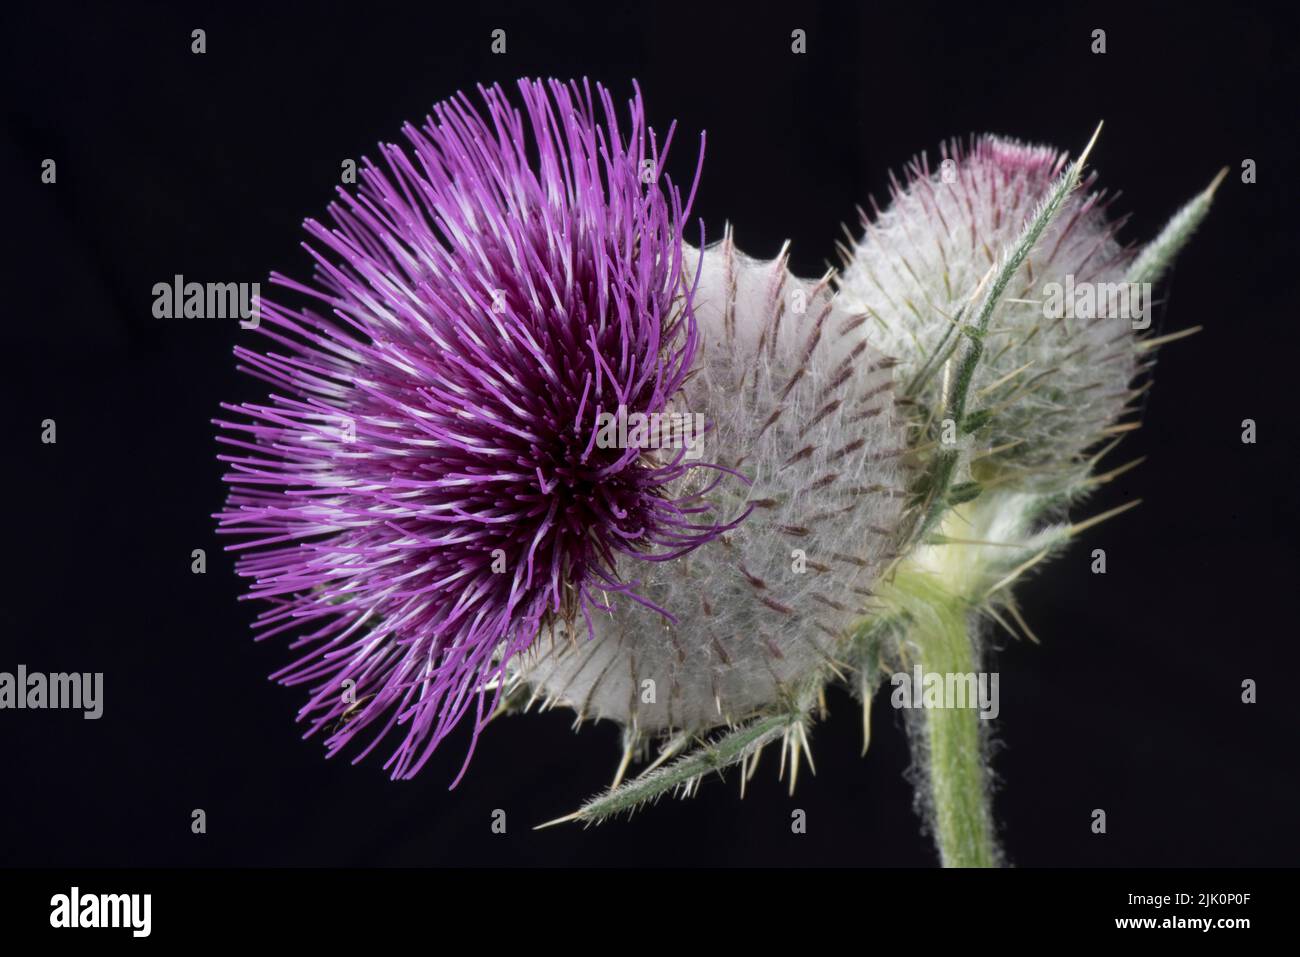 Woolly thistle (Cirsium eriophorum) single flower with purple disc florets and spherical flower head covered with spines and webbing hairs, Stock Photo